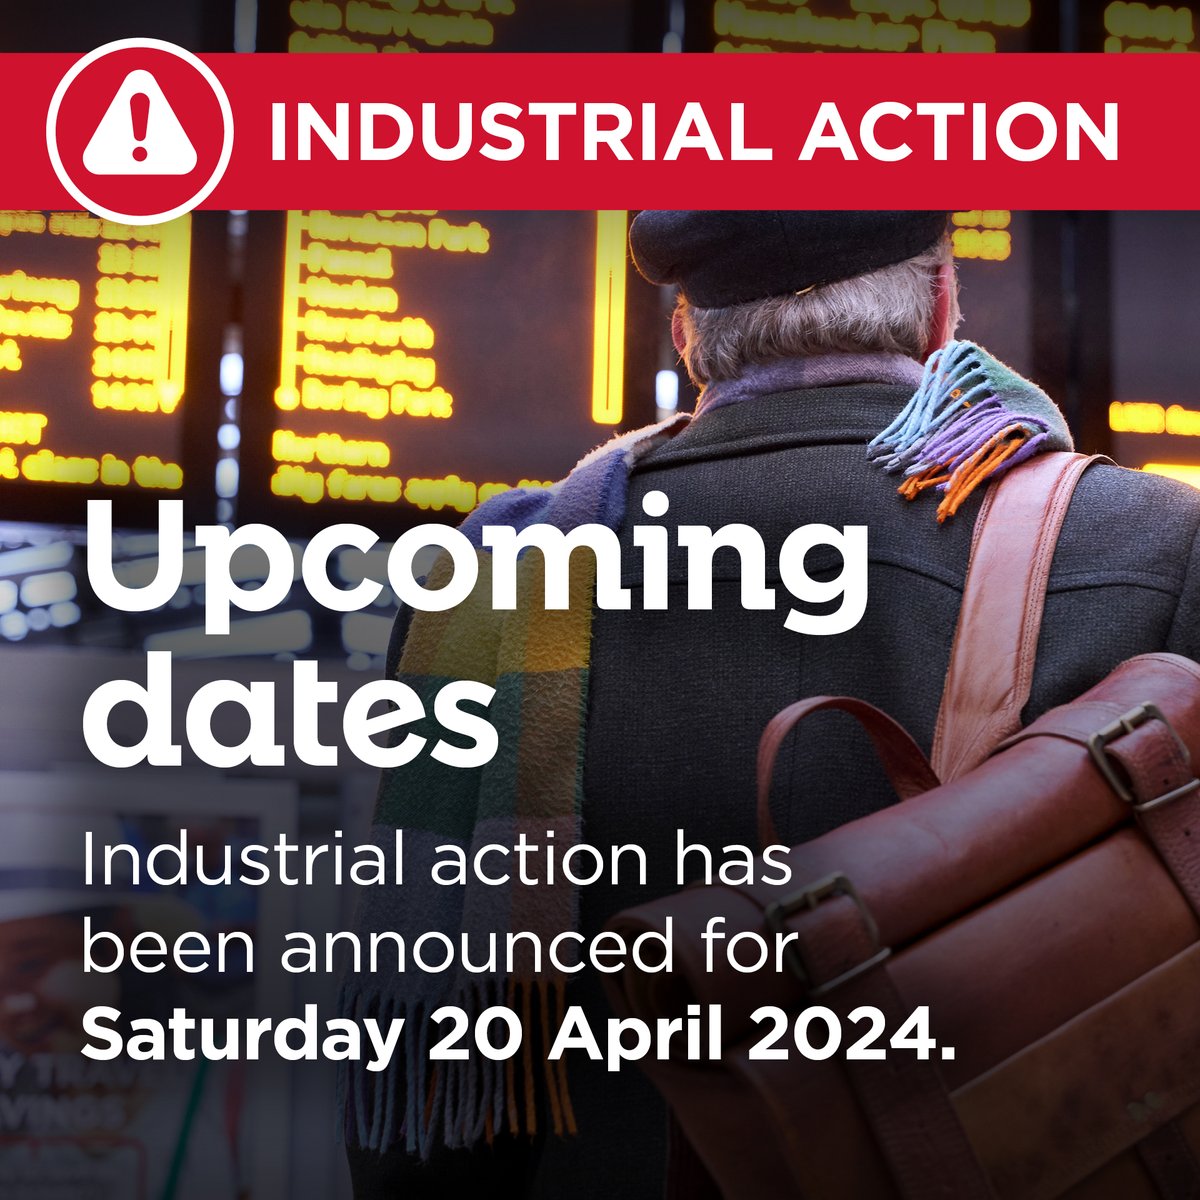 We are running a reduced service across most of our route on Sat 20 April due to industrial action. Tickets are now back on sale for 20 April & journey planners up to date. For the most up to date info please visit: lner.co.uk/travel-informa… 1/2